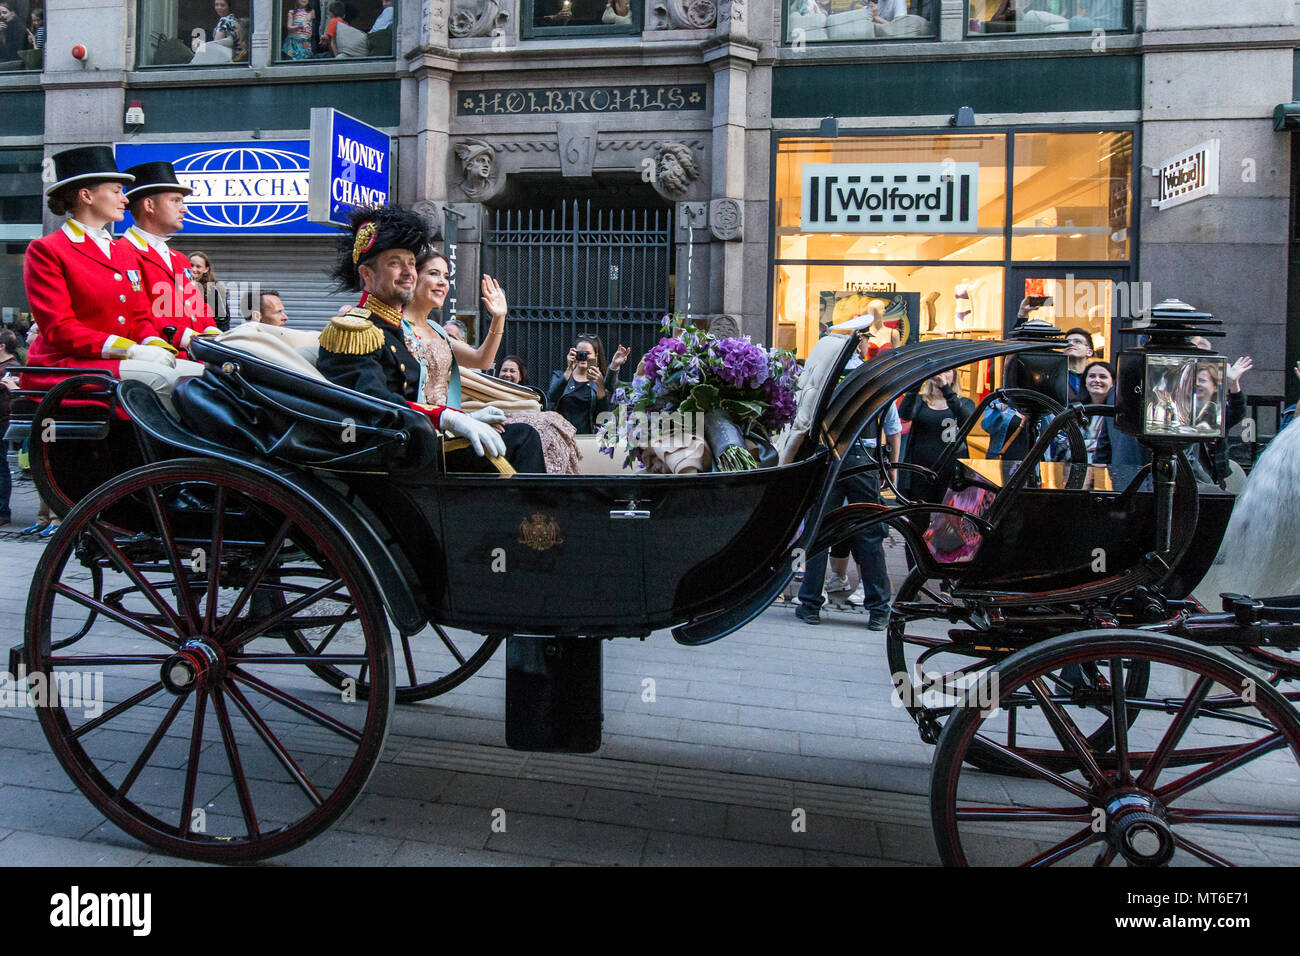 Frederik, Crown Prince of Denmark and Princess Mary are transported in a horse carriage at Strøget in central Copenhagen as part of the public celebration of Crown Prince Frederik's 50 year old birthday. Stock Photo